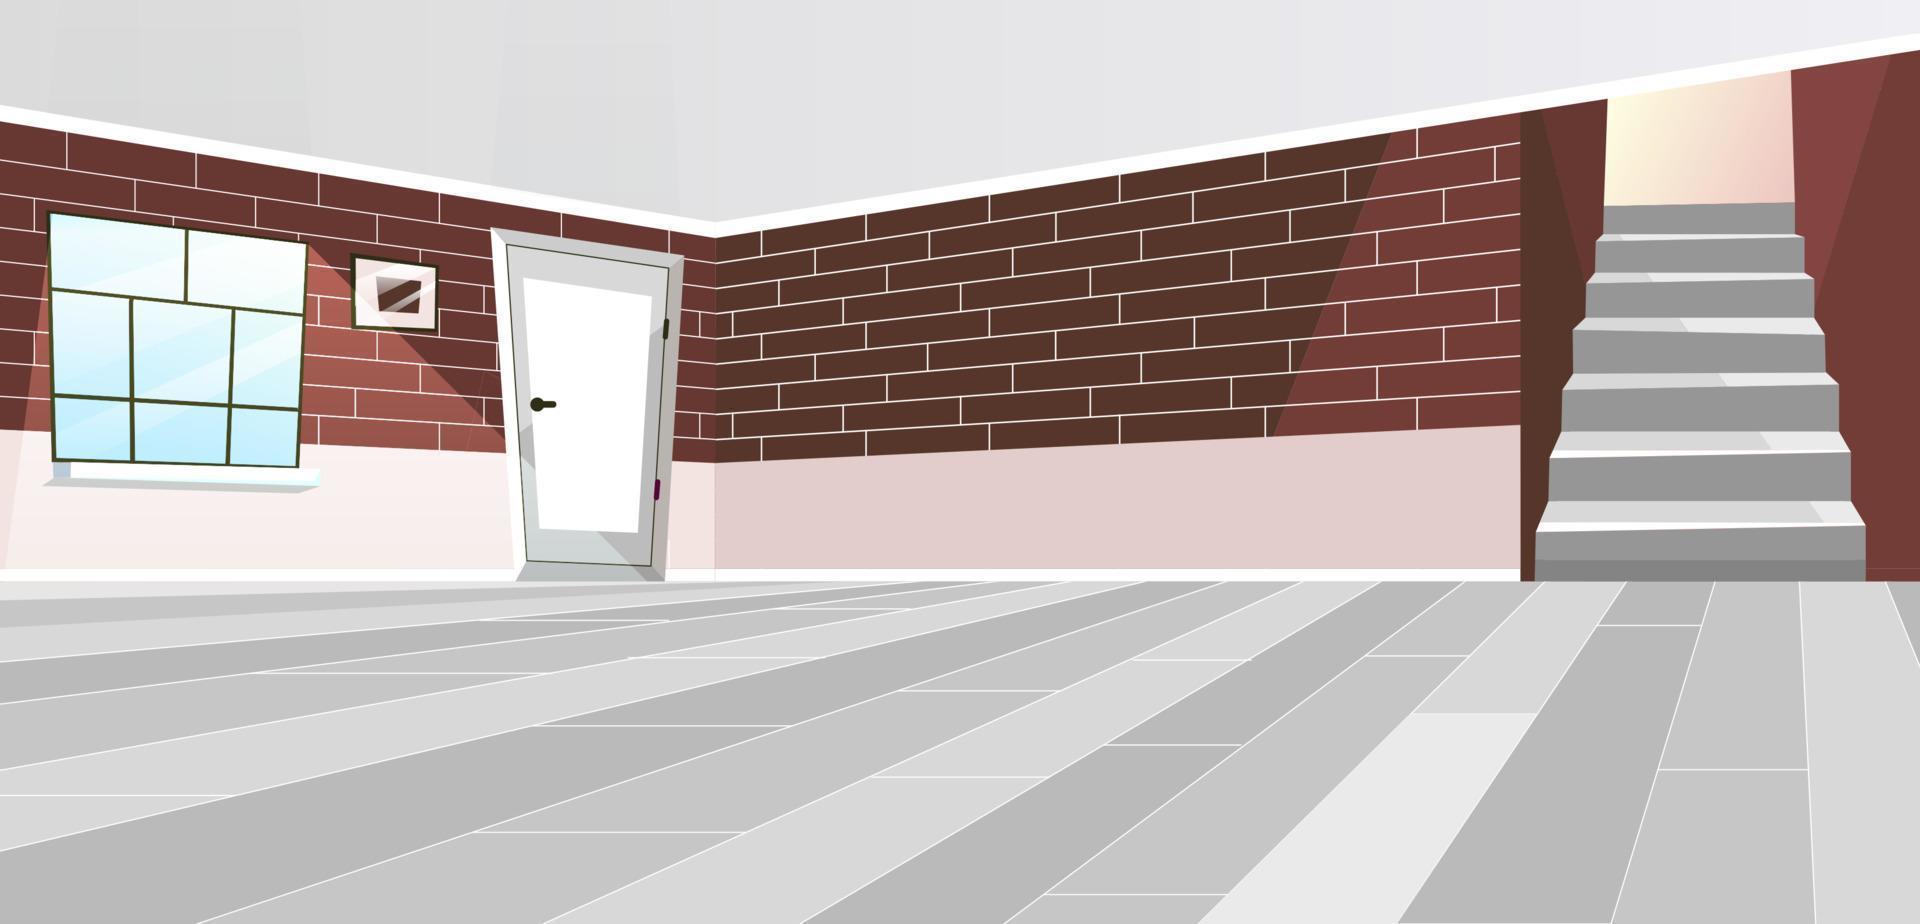 Empty room interior flat vector illustration. Cartoon door and staircase.  Vintage style brown brick wall. Luxury cottage hall with big window and  painting decor on wall. Minimalist floor and ceiling 4305894 Vector